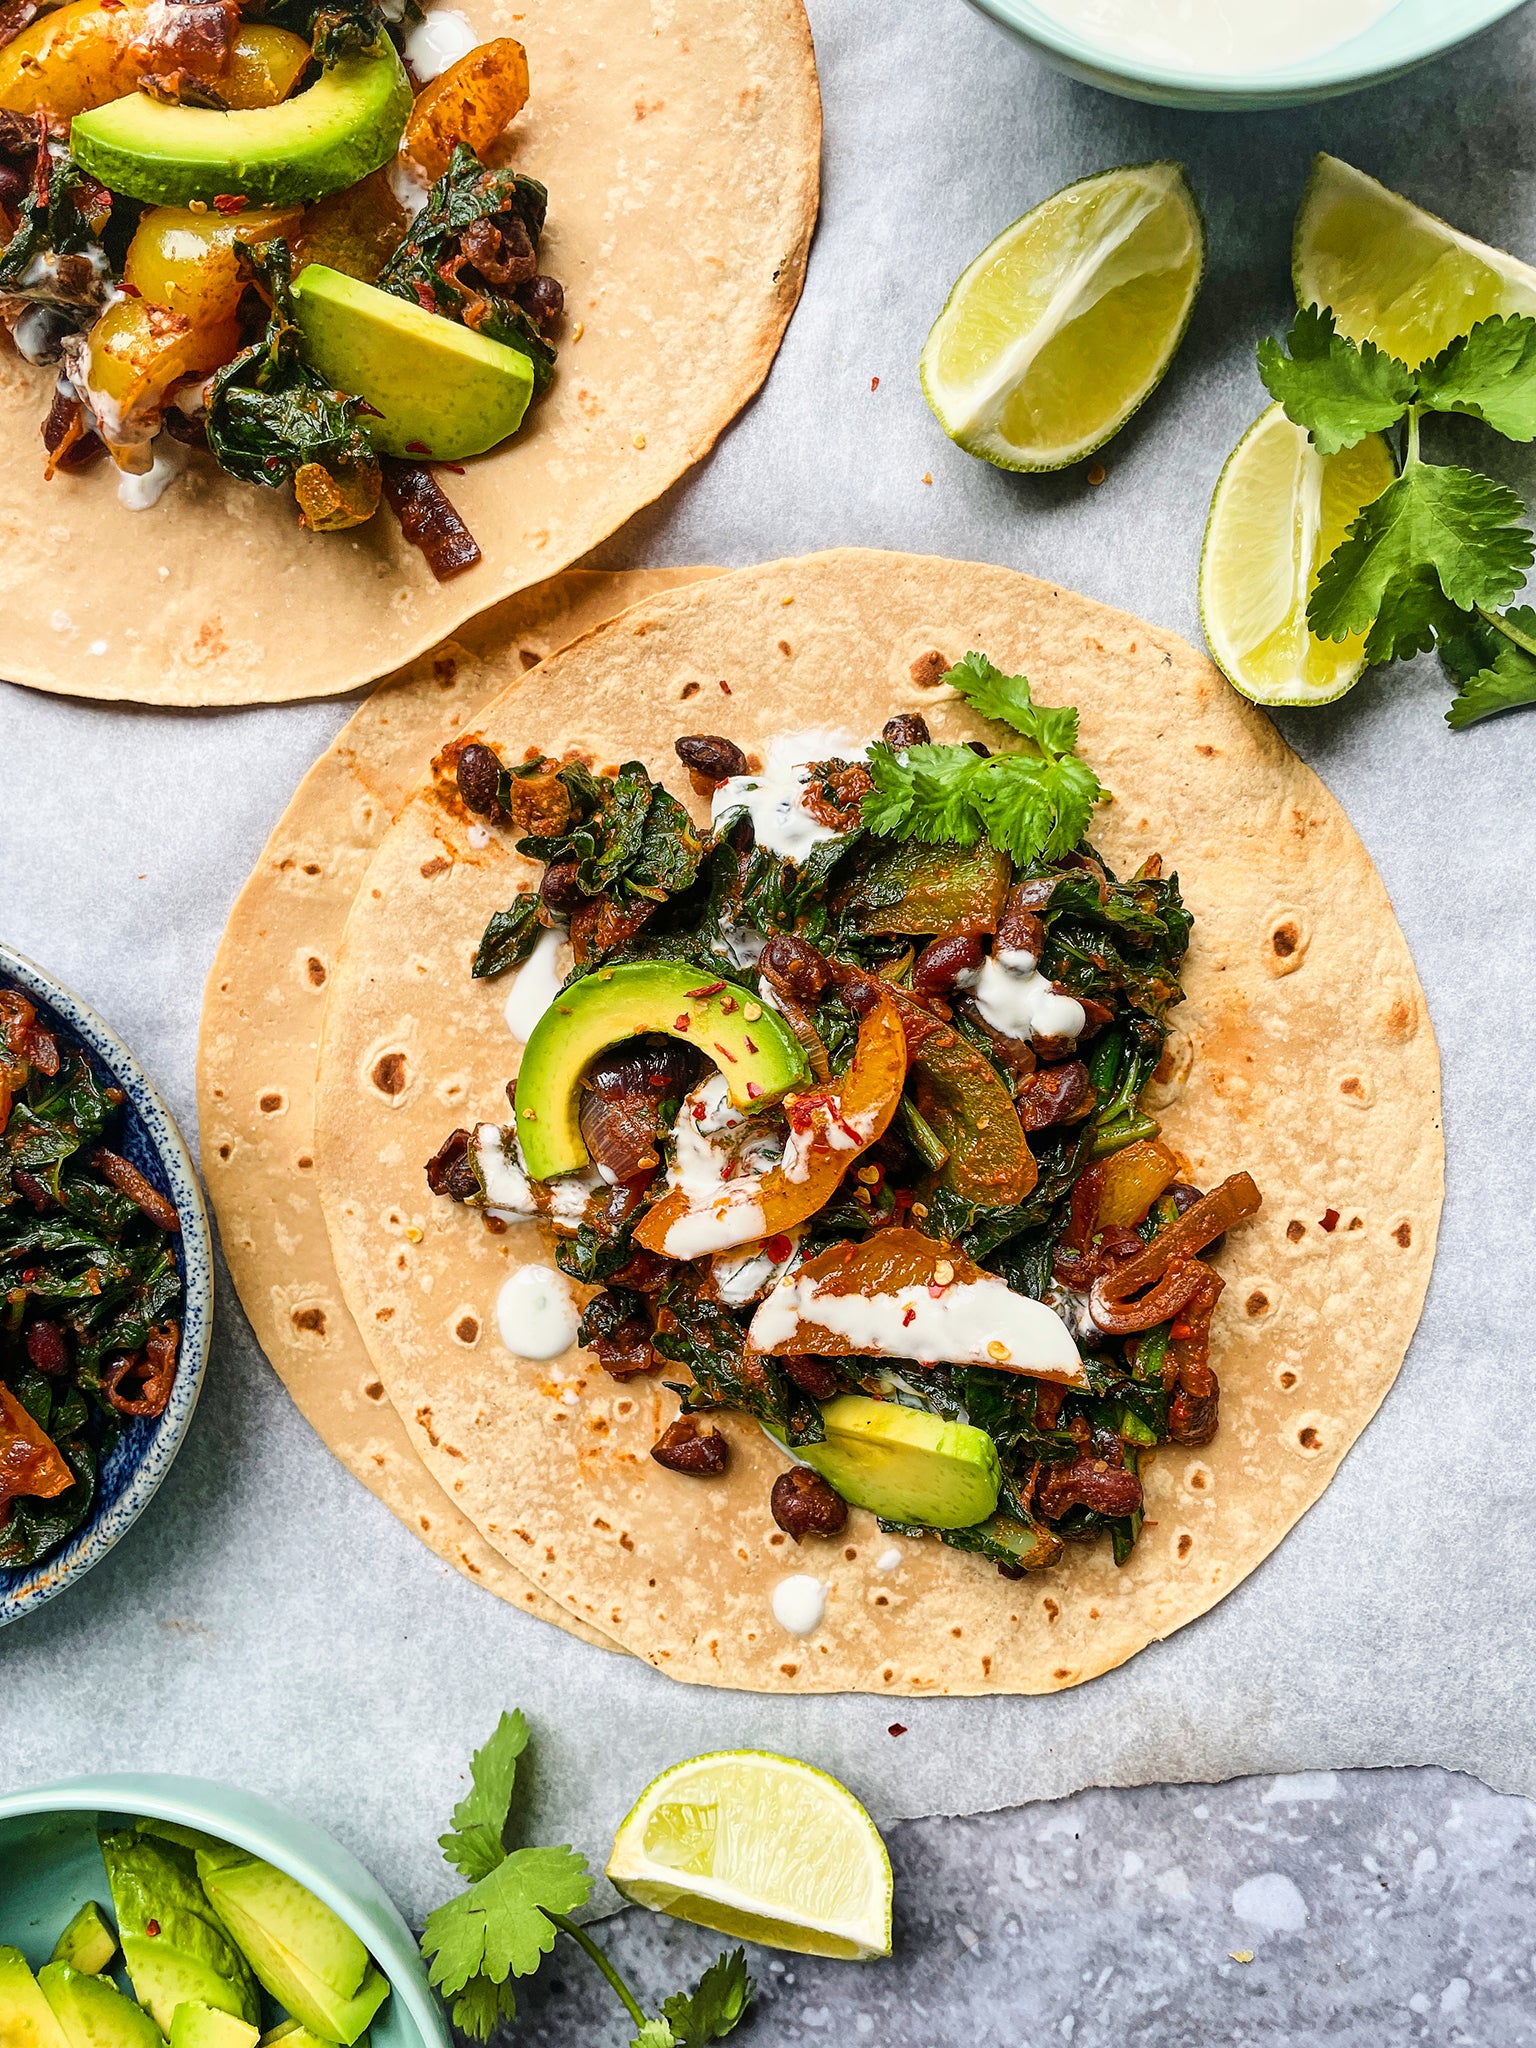 Made with black beans and juicy avocadoes, these fajitas are suitable for vegetarians and a source of fibre and protein